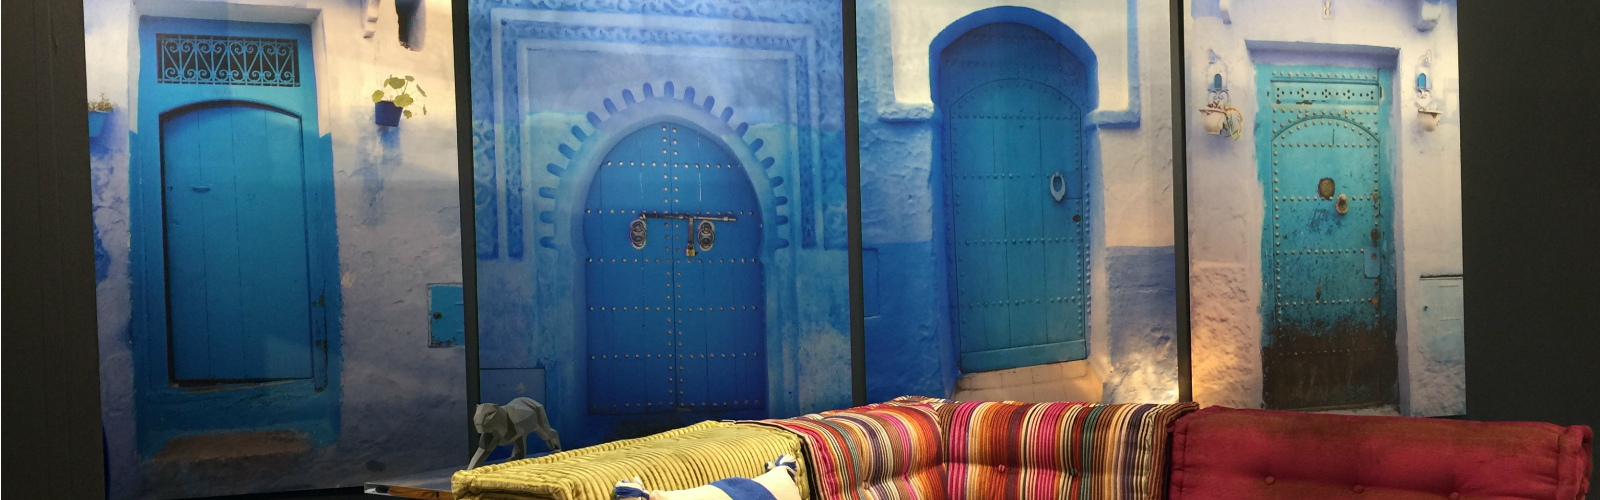 Vicki Rulli is turning people's memories into prints, like these Moroccan Doors.